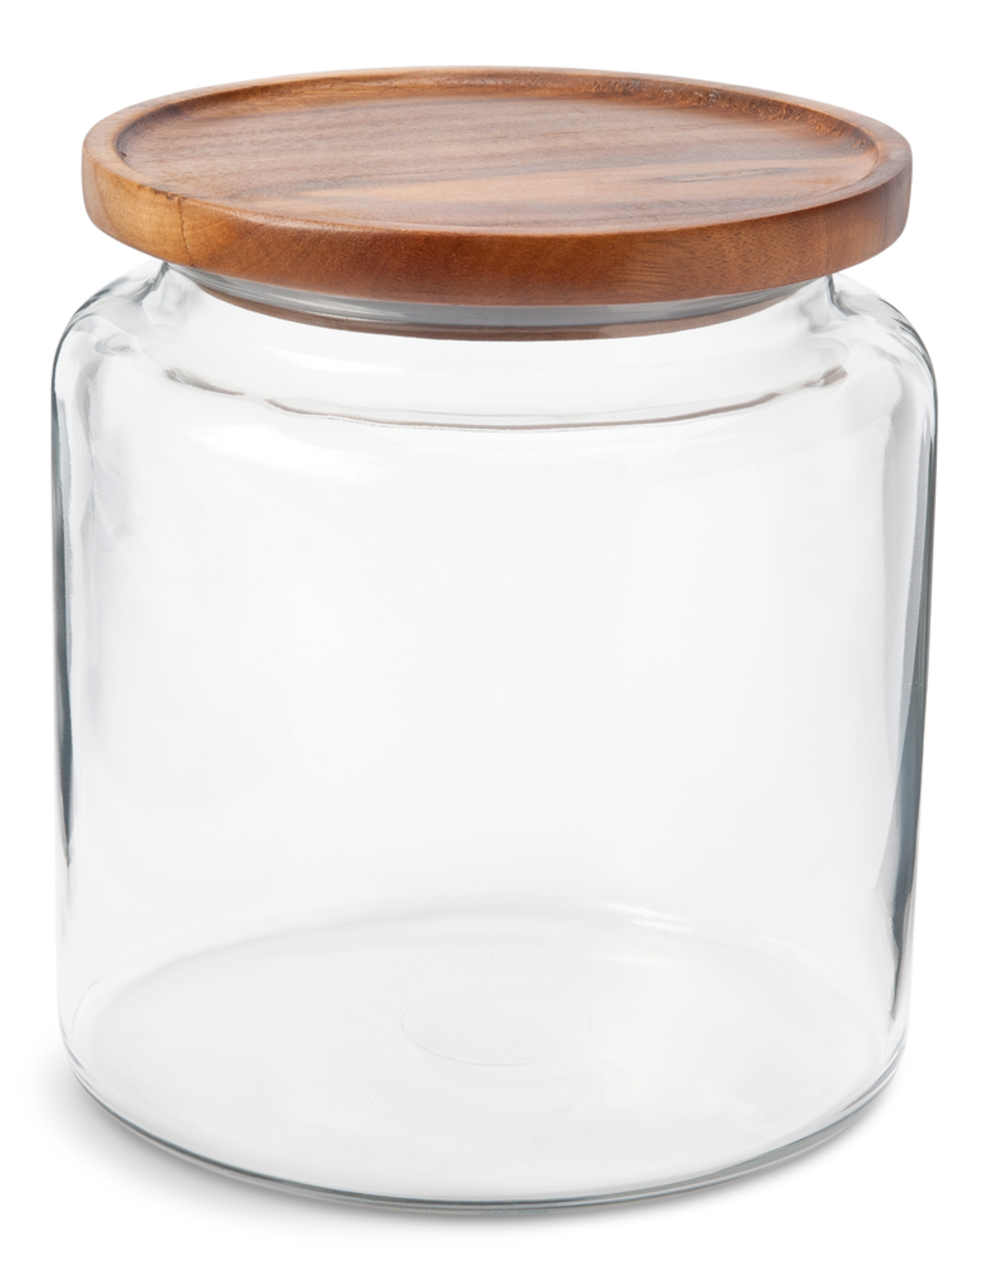 https://media-www.canadiantire.ca/product/living/kitchen/food-storage/1427251/anchor-hocking-96oz-montana-jar-with-acacia-lid-defdc659-ad09-441b-abf2-b1be79338c7c.png?imdensity=1&imwidth=640&impolicy=mZoom